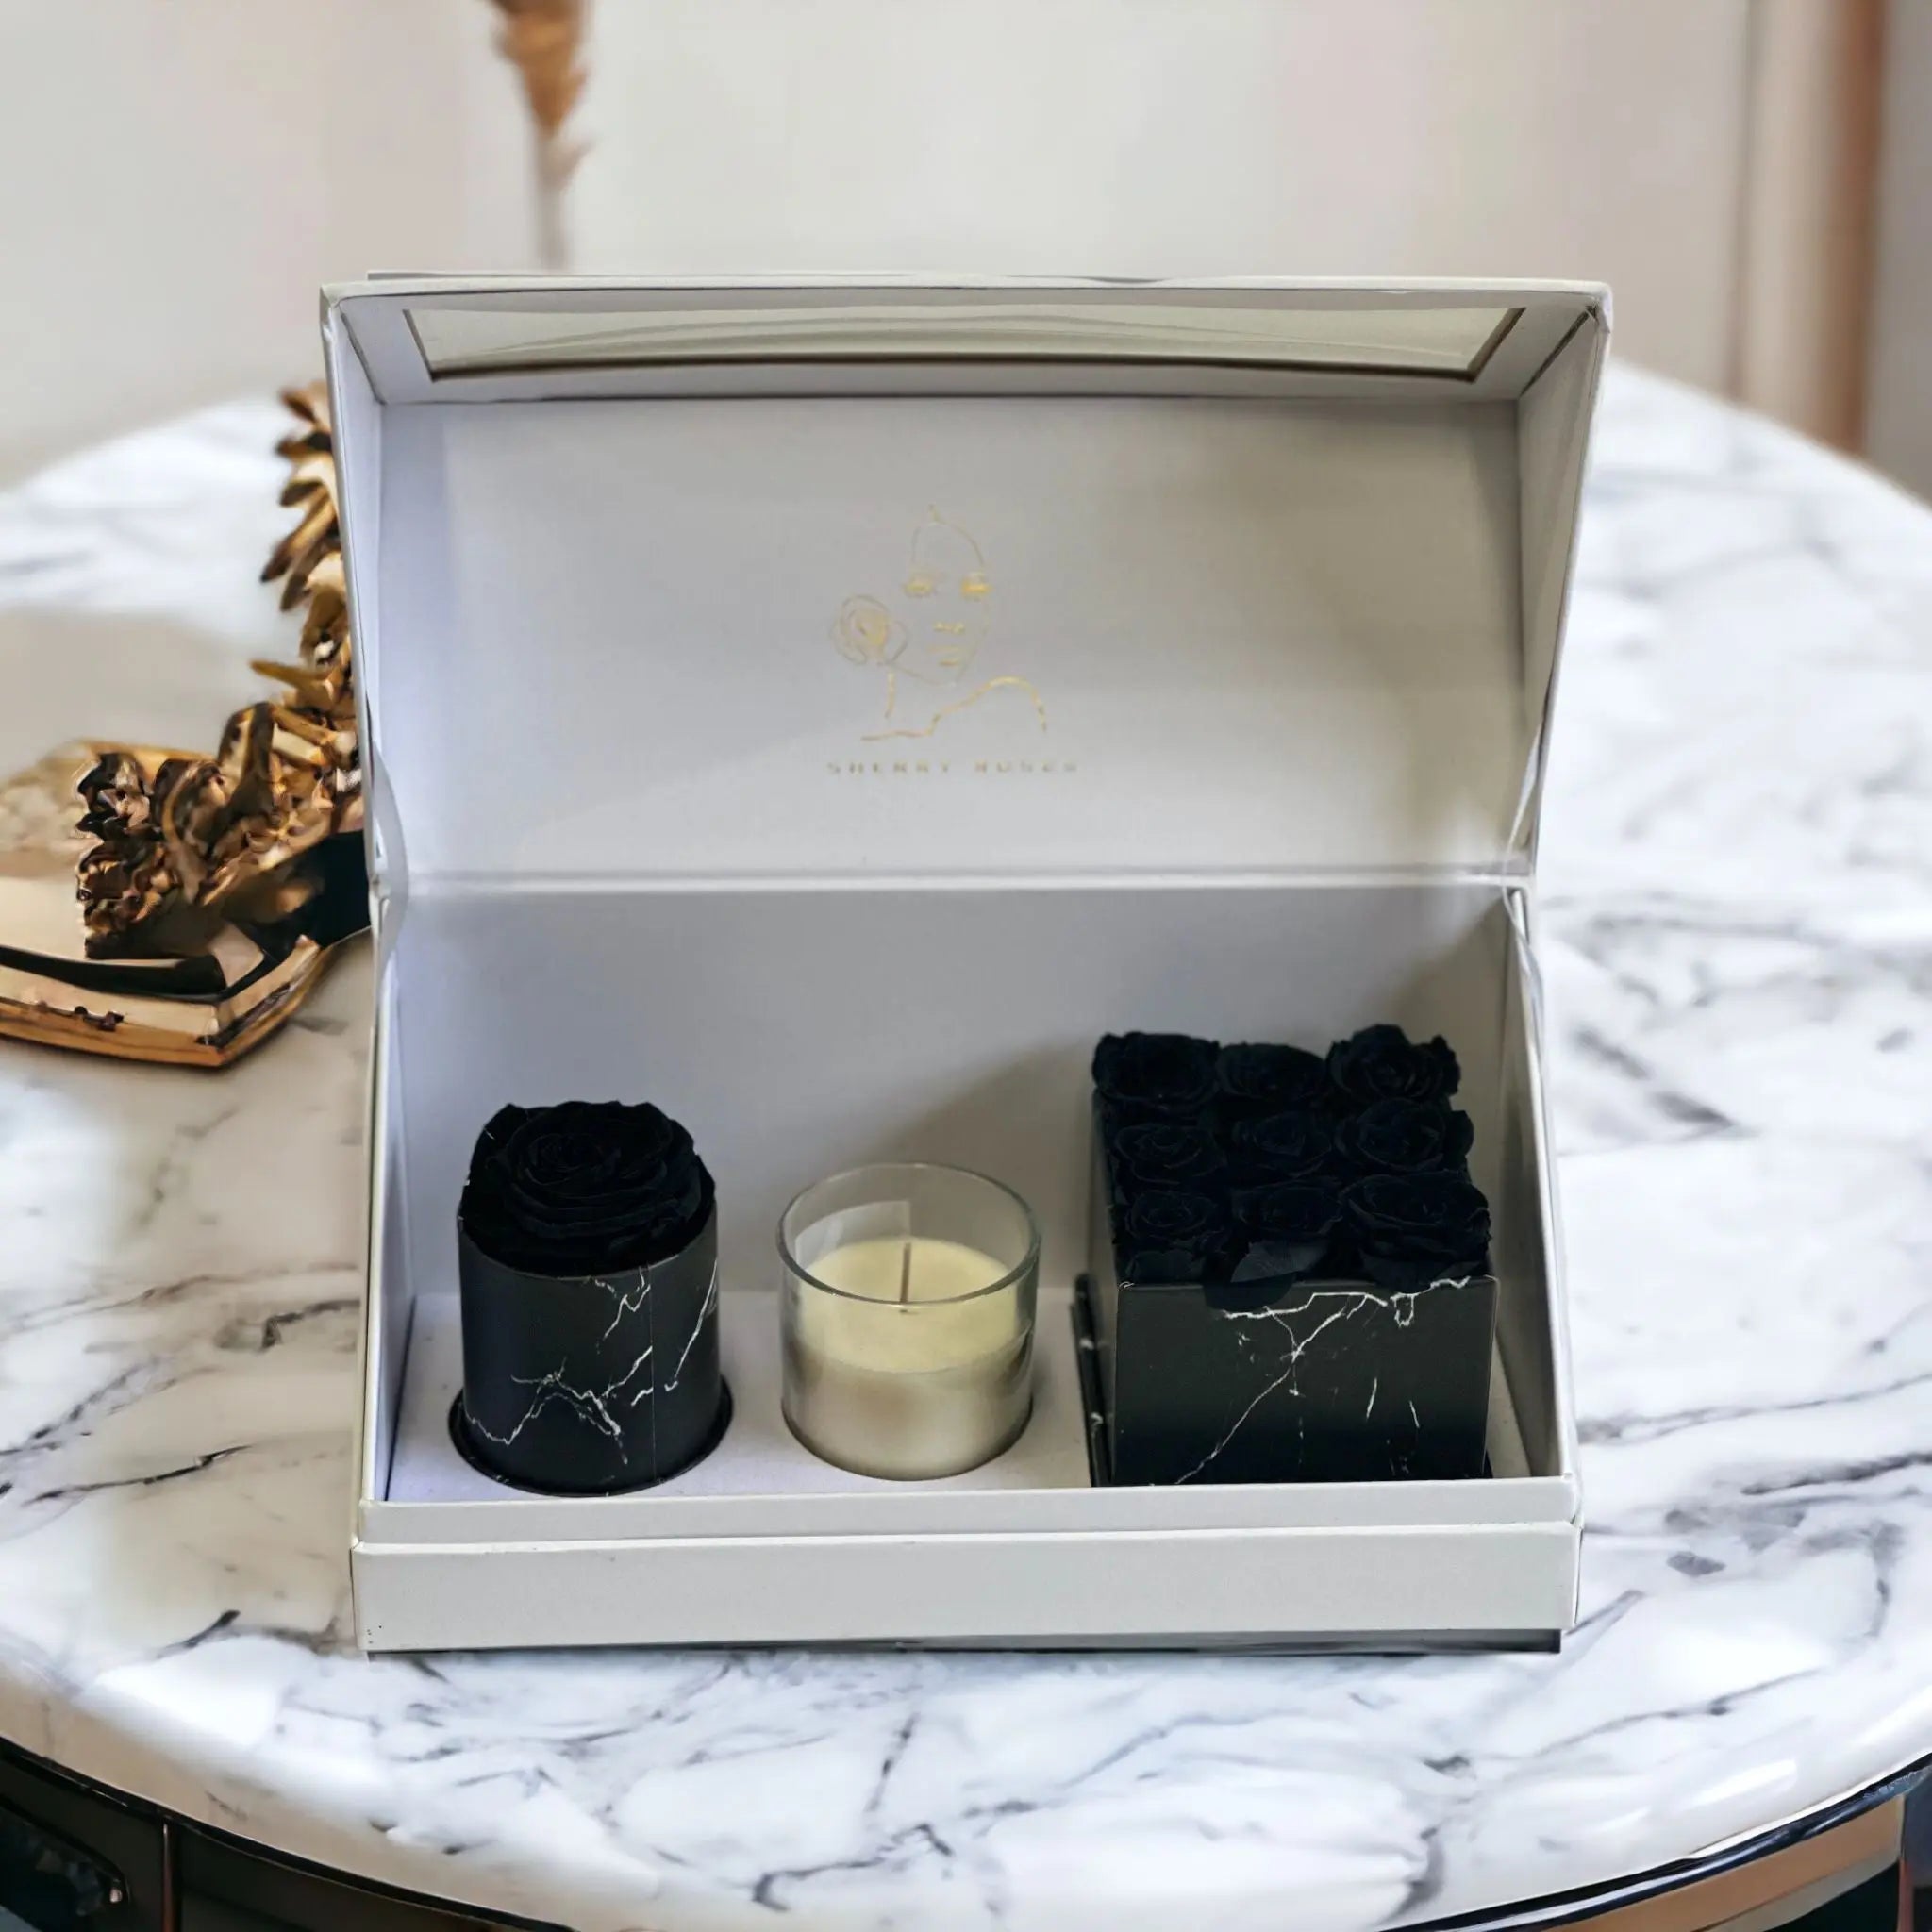 Sherry Deluxe Suede Bundle Rectangular Box + Roses and Candle  (Everlasting Roses) -  Armani gallery -  Armani Gallery